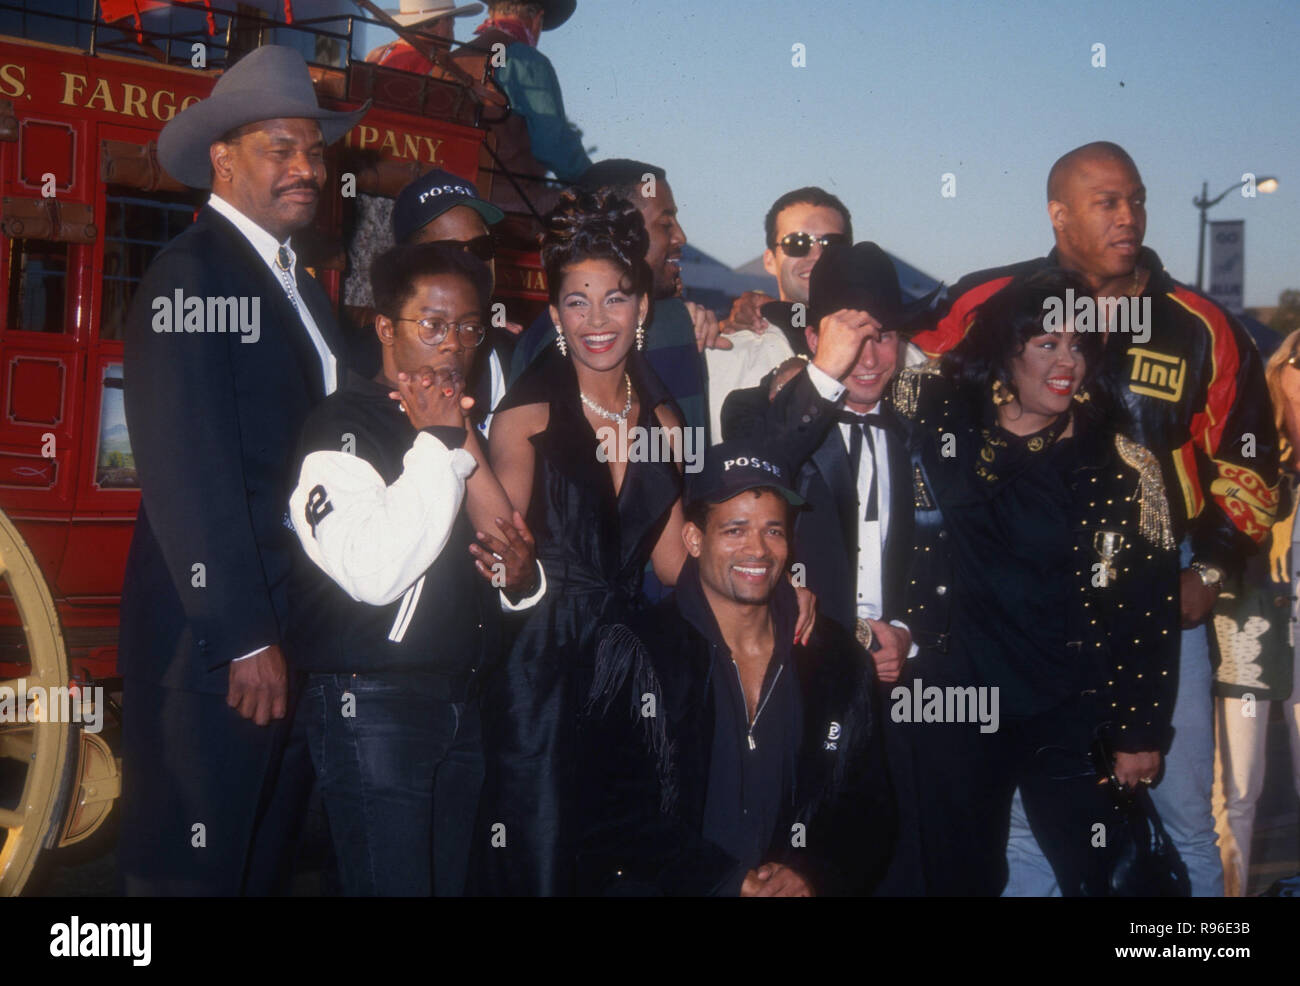 HOLLYWOOD, CA - MAY 12: (L-R) Actors Charles Lane, Salli Richardson, Tone Loc, director Mario Van Peebles, actors Billy Zane and Stephen Baldwin attend the 'Posse' Premiere on May 12,1993 at the Cinerama Dome in Hollywood, California. Photo by Barry King/Alamy Stock Photo Stock Photo